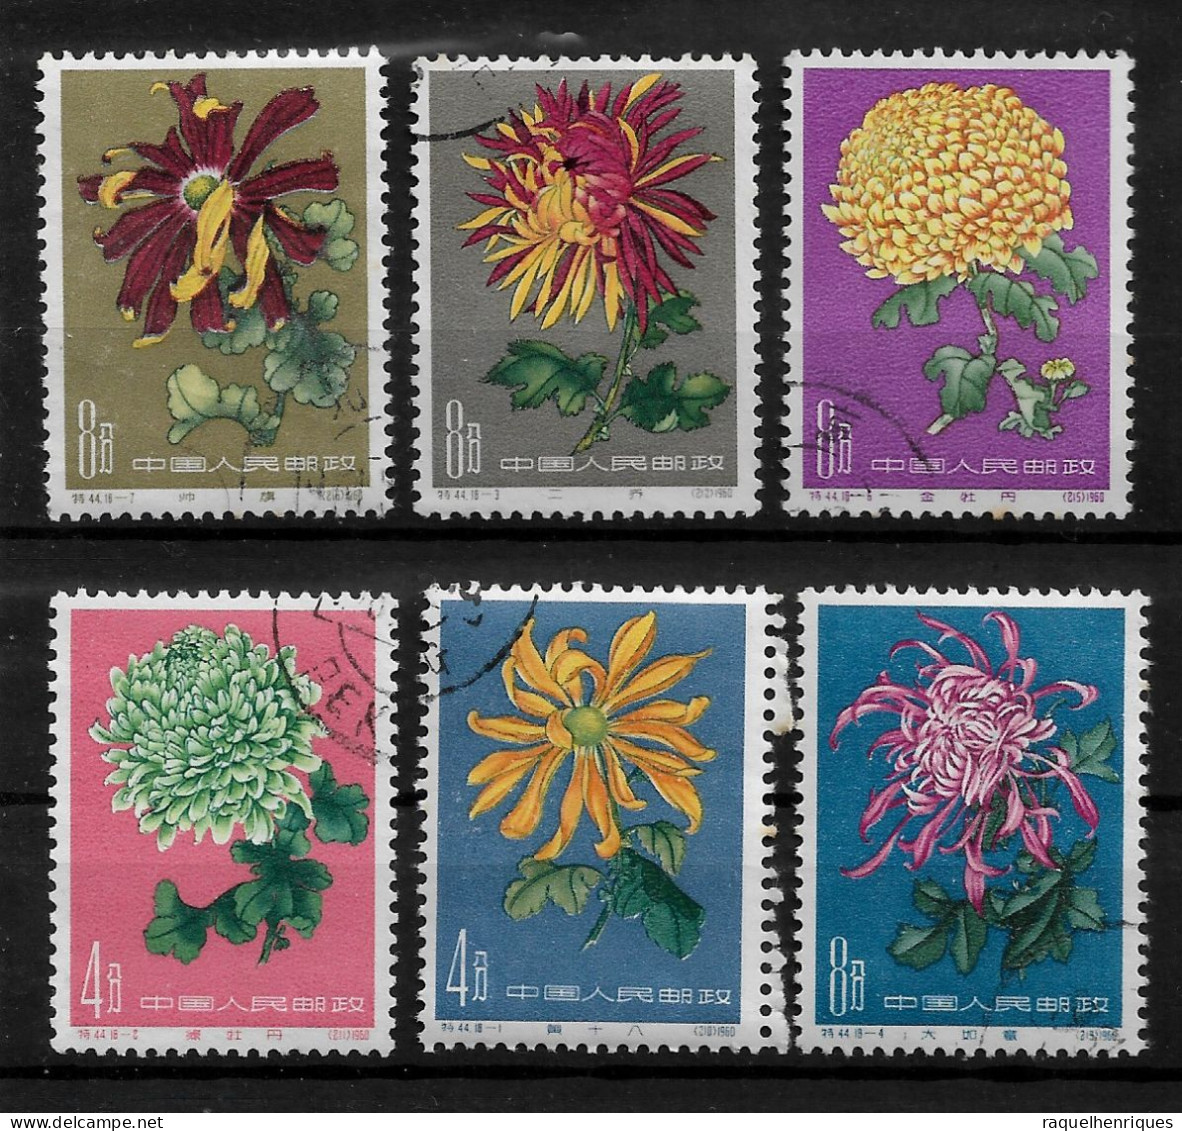 CHINA 1961 Flowers - Chrysanthemums 6 Stamps USED (NP#72-P31) - Chine Du Nord-Est 1946-48